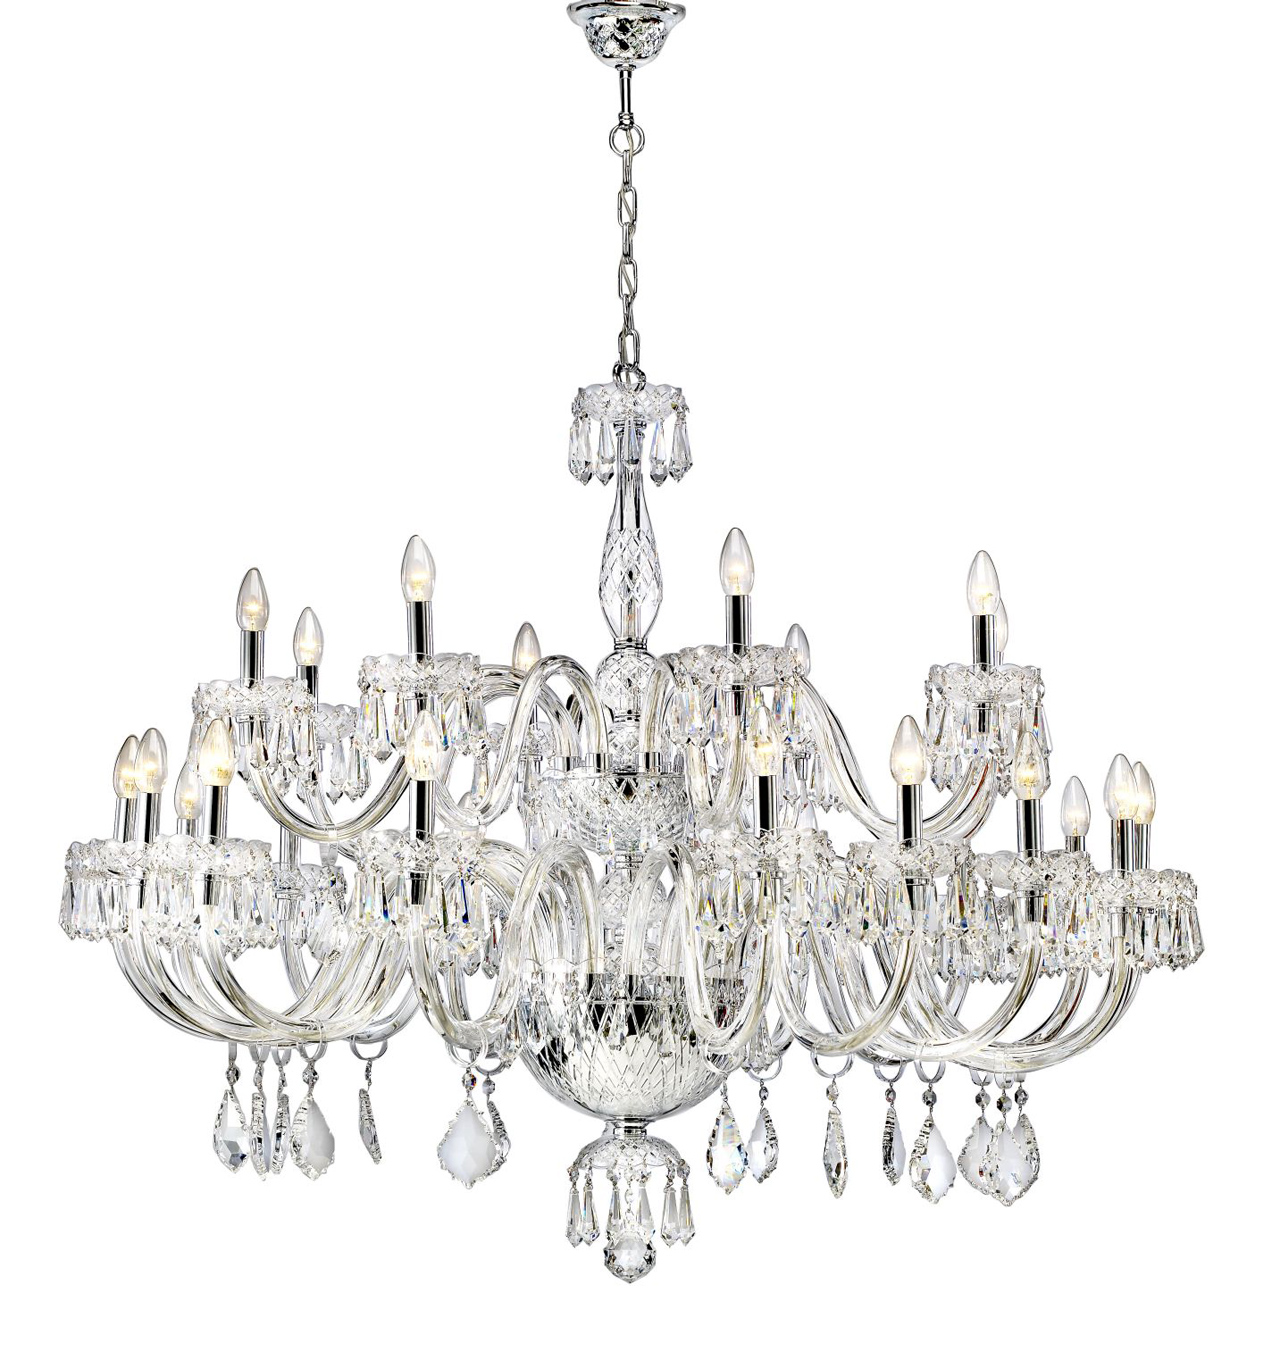 Vista Alegre Diamond Chandelier on 2 levels with 24 arms